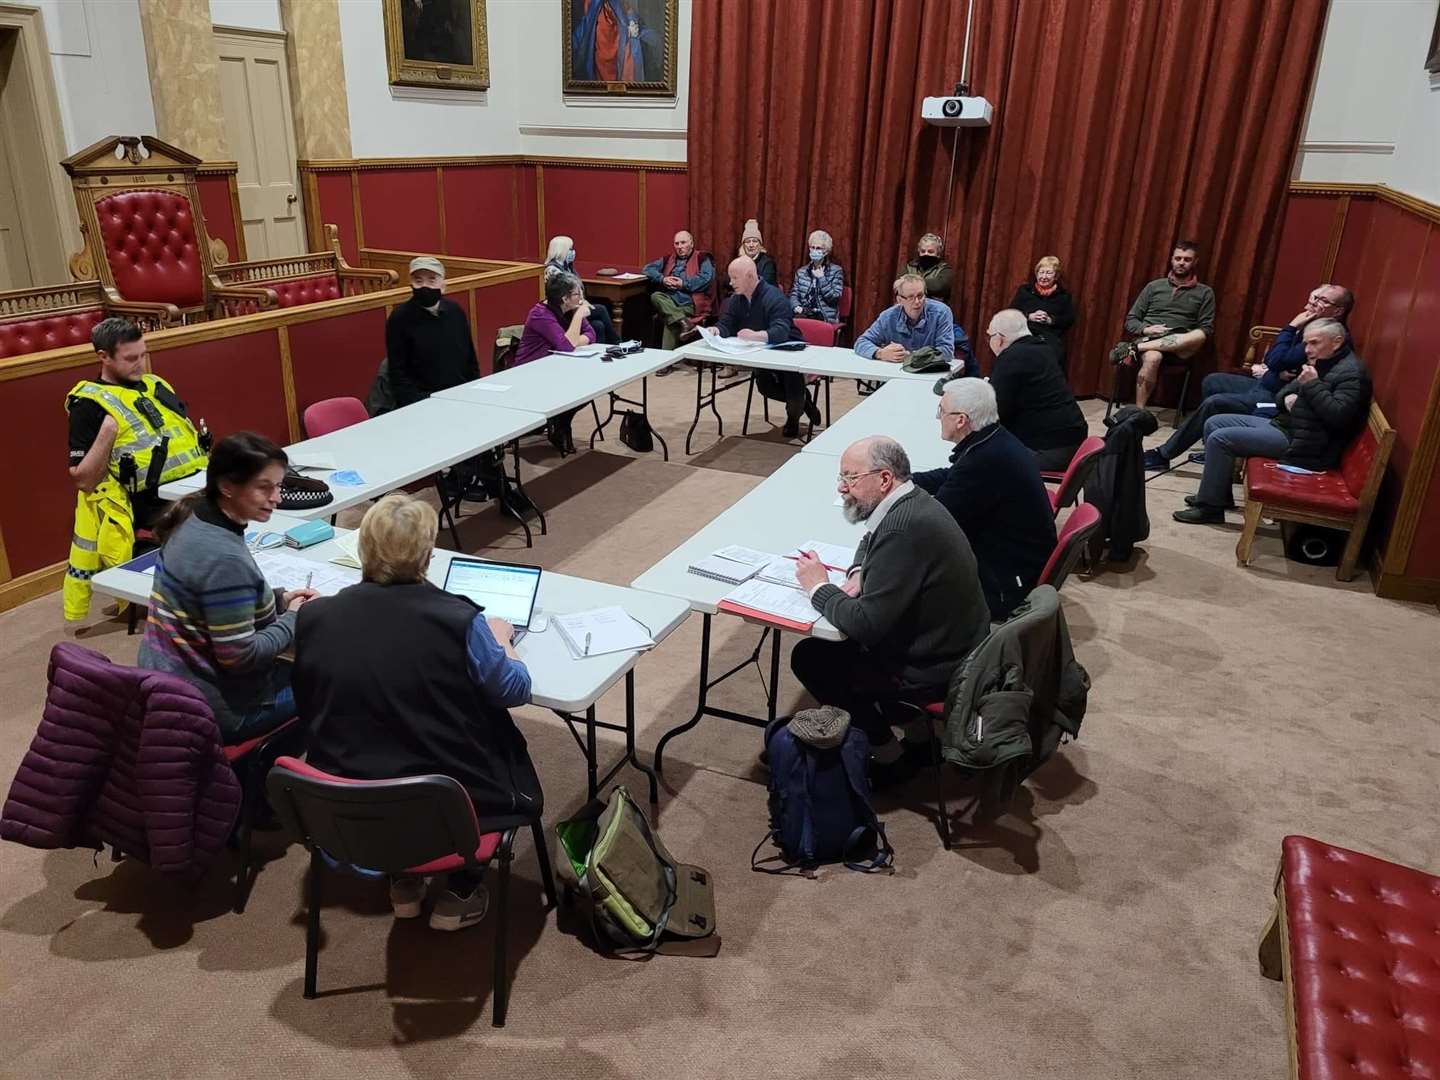 Forres Community Council met in the courtroom upstairs at the Tolbooth but can meet on the ground floor if required.